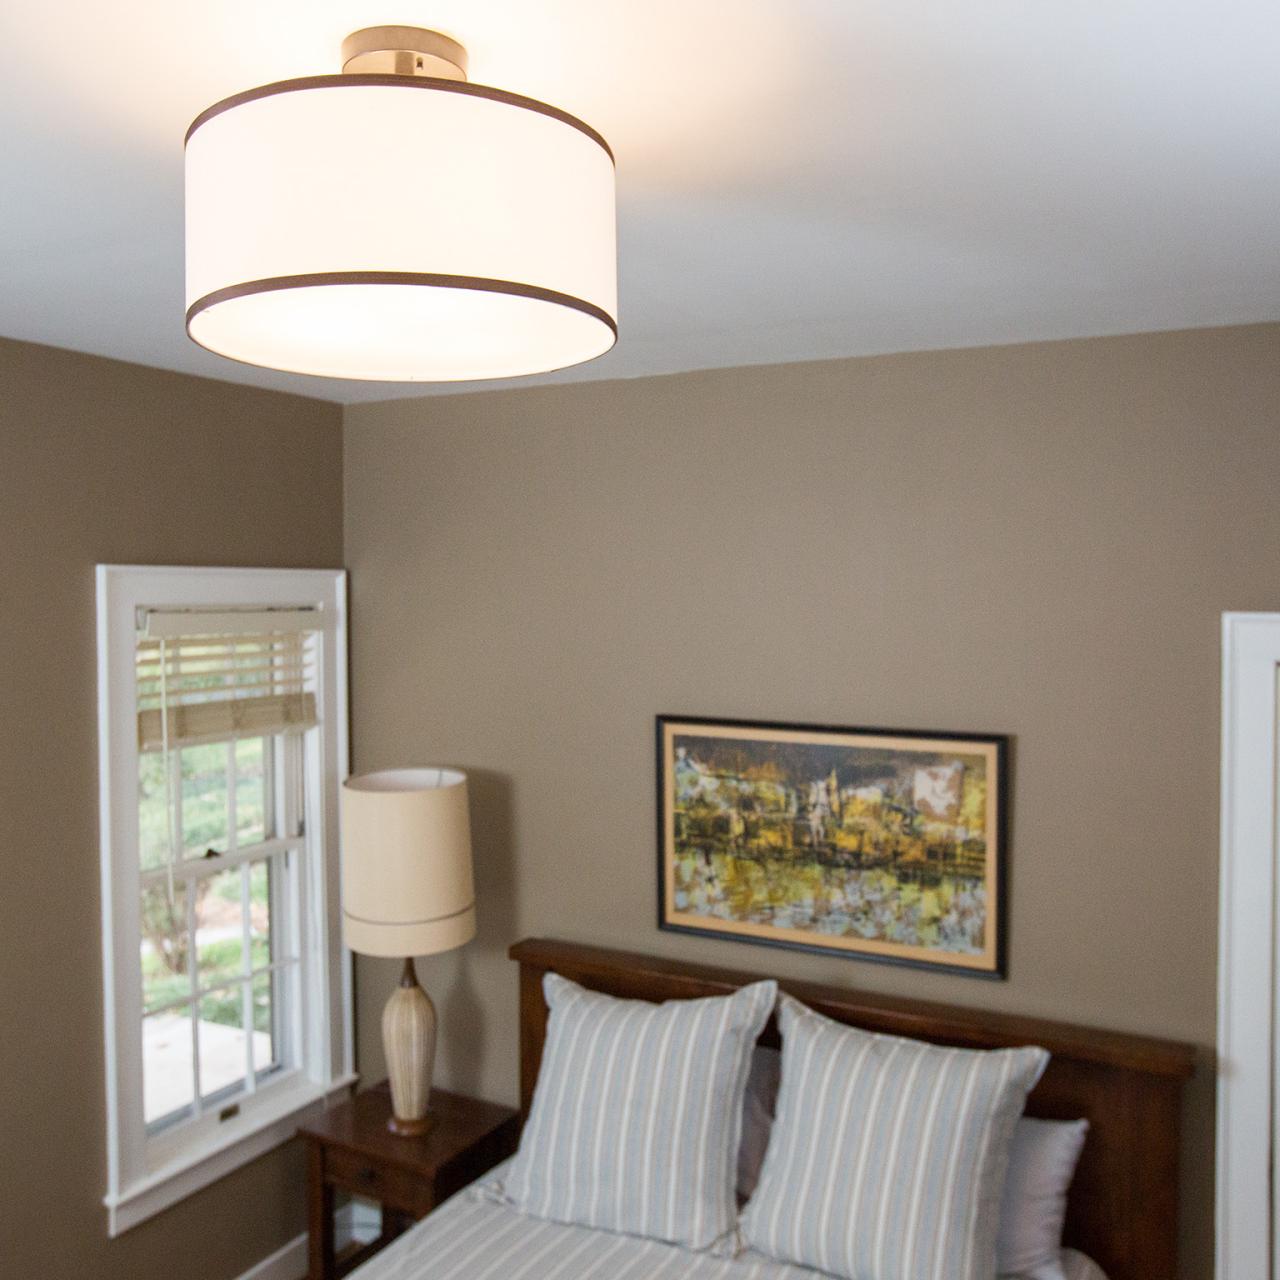 How to Change a Light Fixture Without Hiring an Electrician